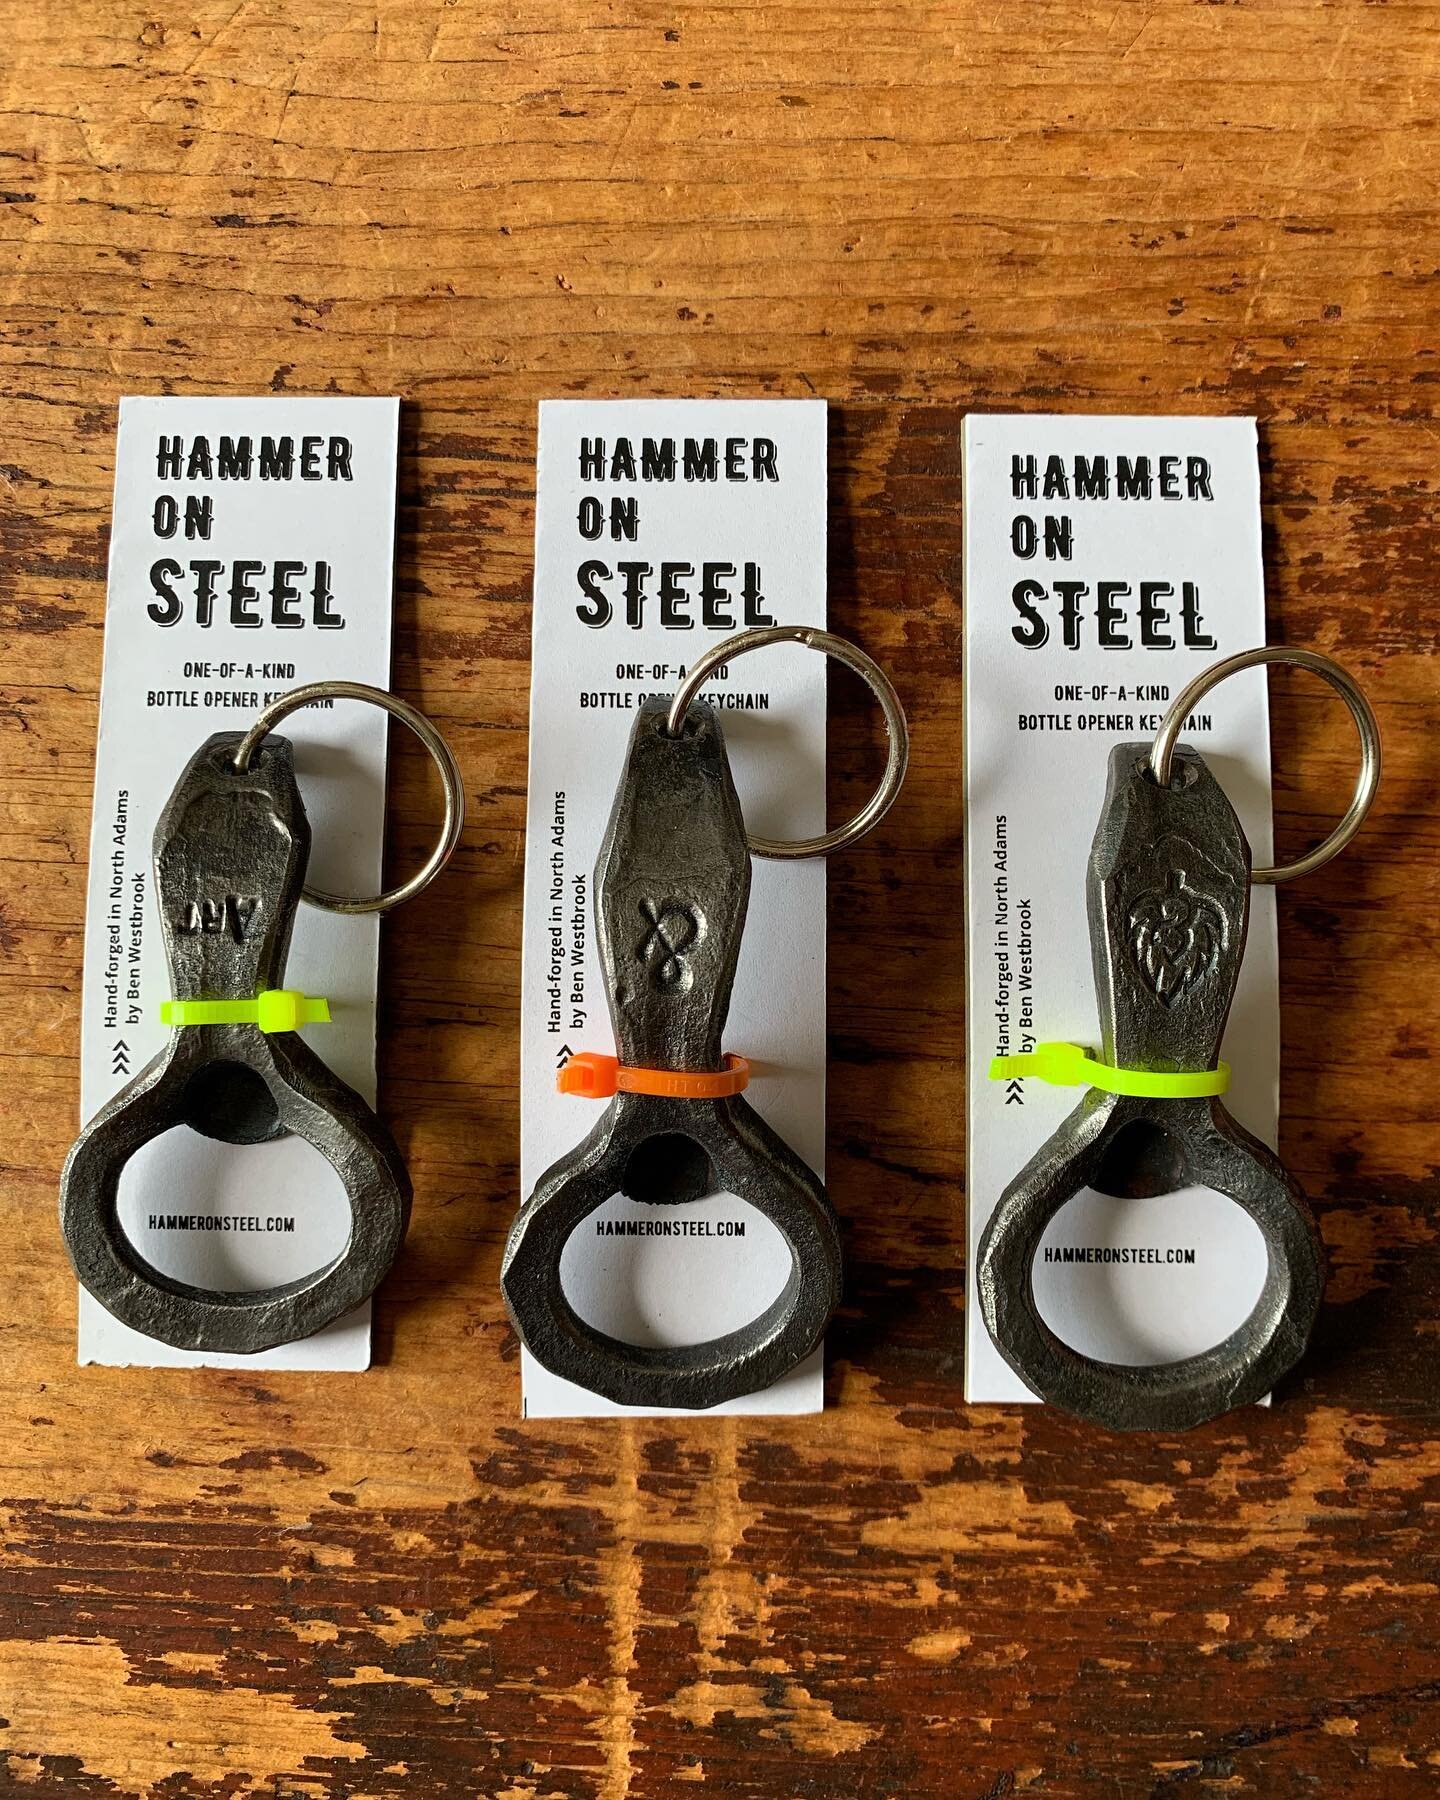 Some new oldies for the art vending machine @artvending_na located at @massmoca. Have fun at Solid Sound, little guys!  Thanks for the killer graphic design @carolyn.e.clayton! 
.
.
.
#handforged #bottleopener #vendingmachine #solidsound #northadams 